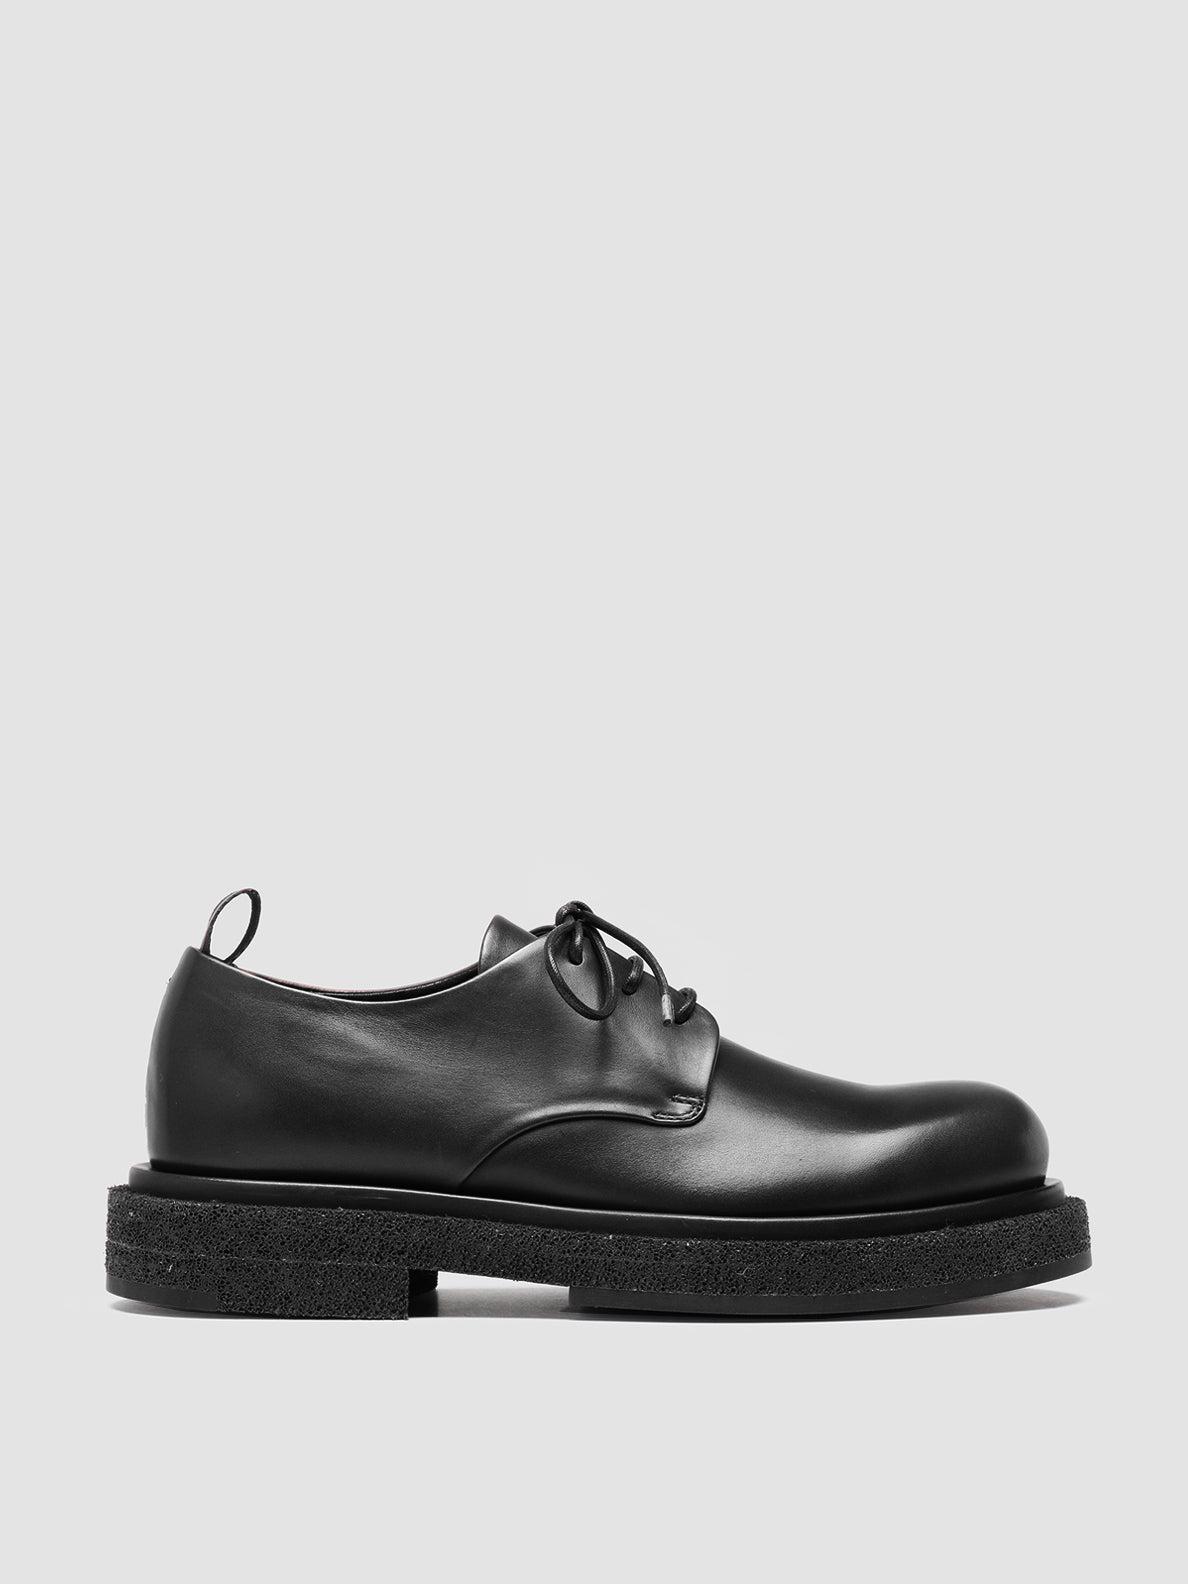 Officine Creative Tonal 100 Nero - Leather Derby Shoes in Black | Lyst